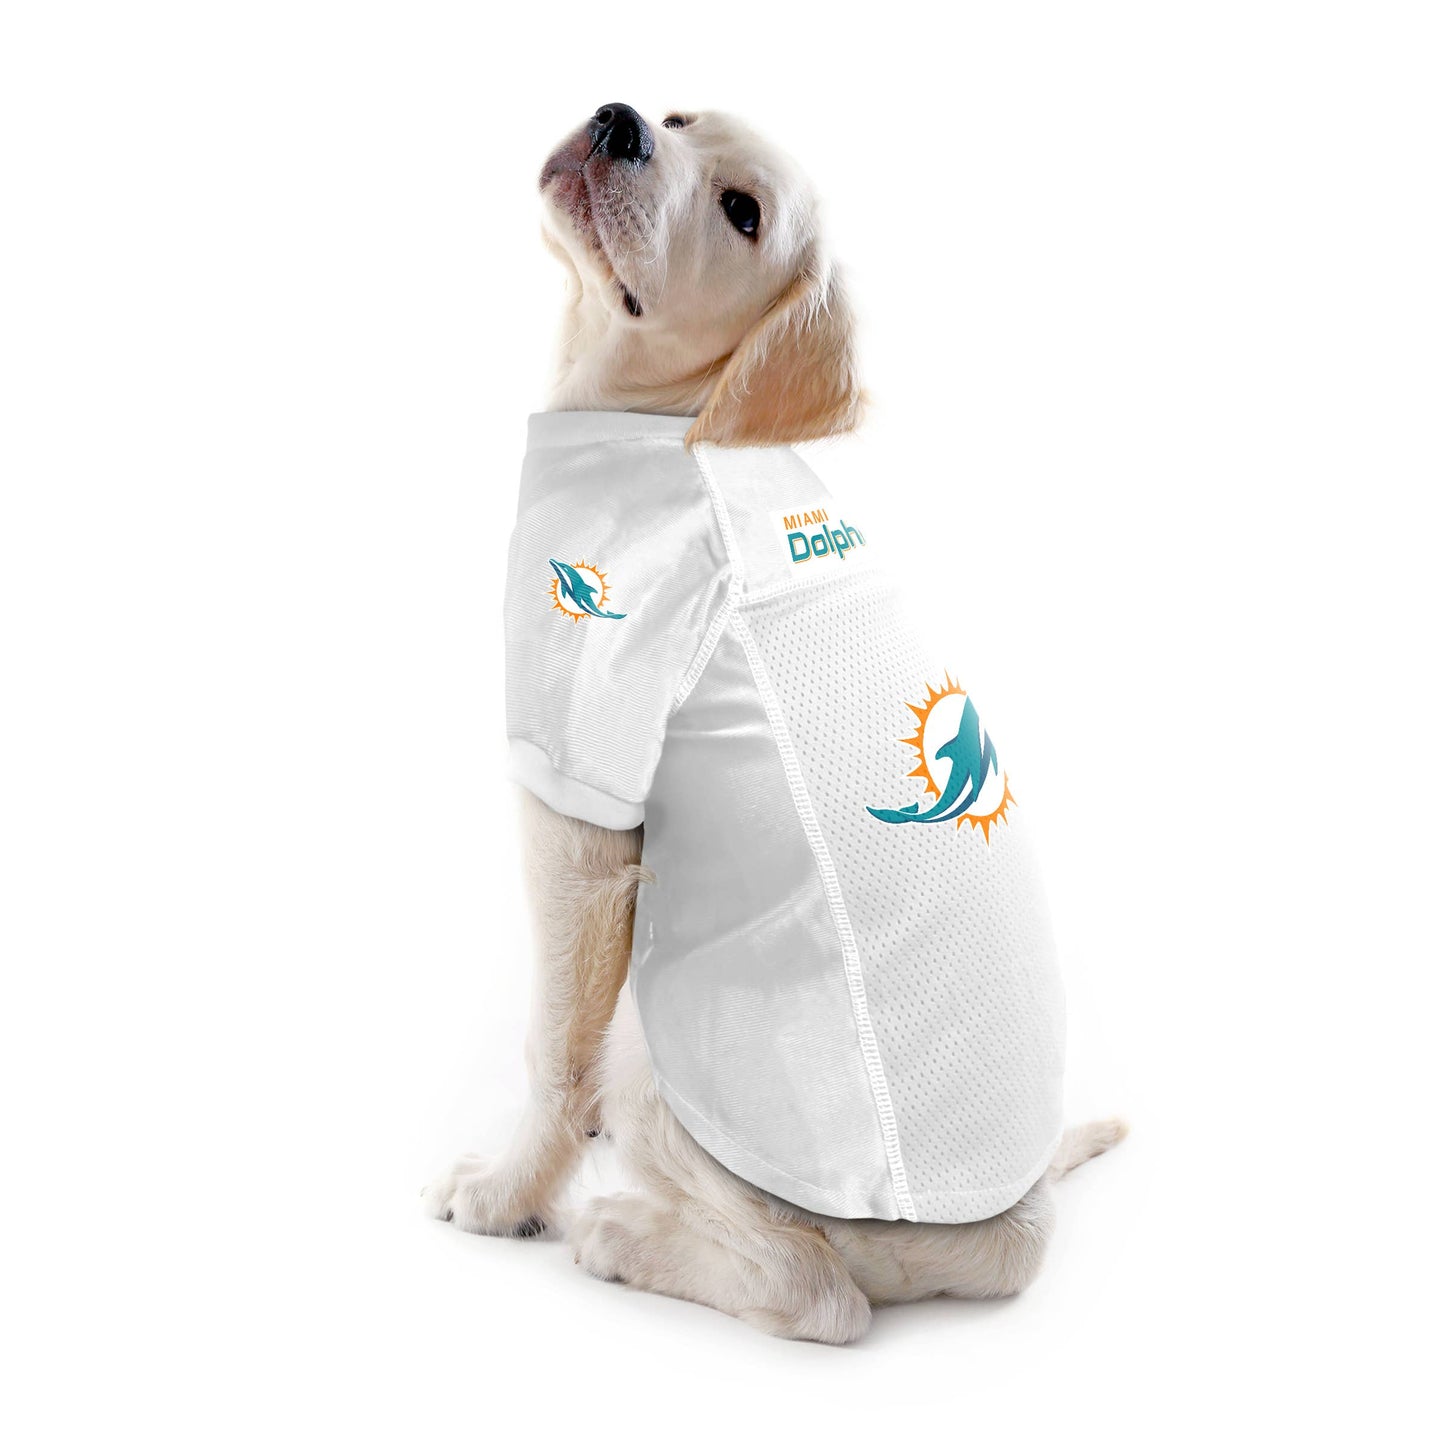 NFL Miami Dolphins licensed Pet Jersey: